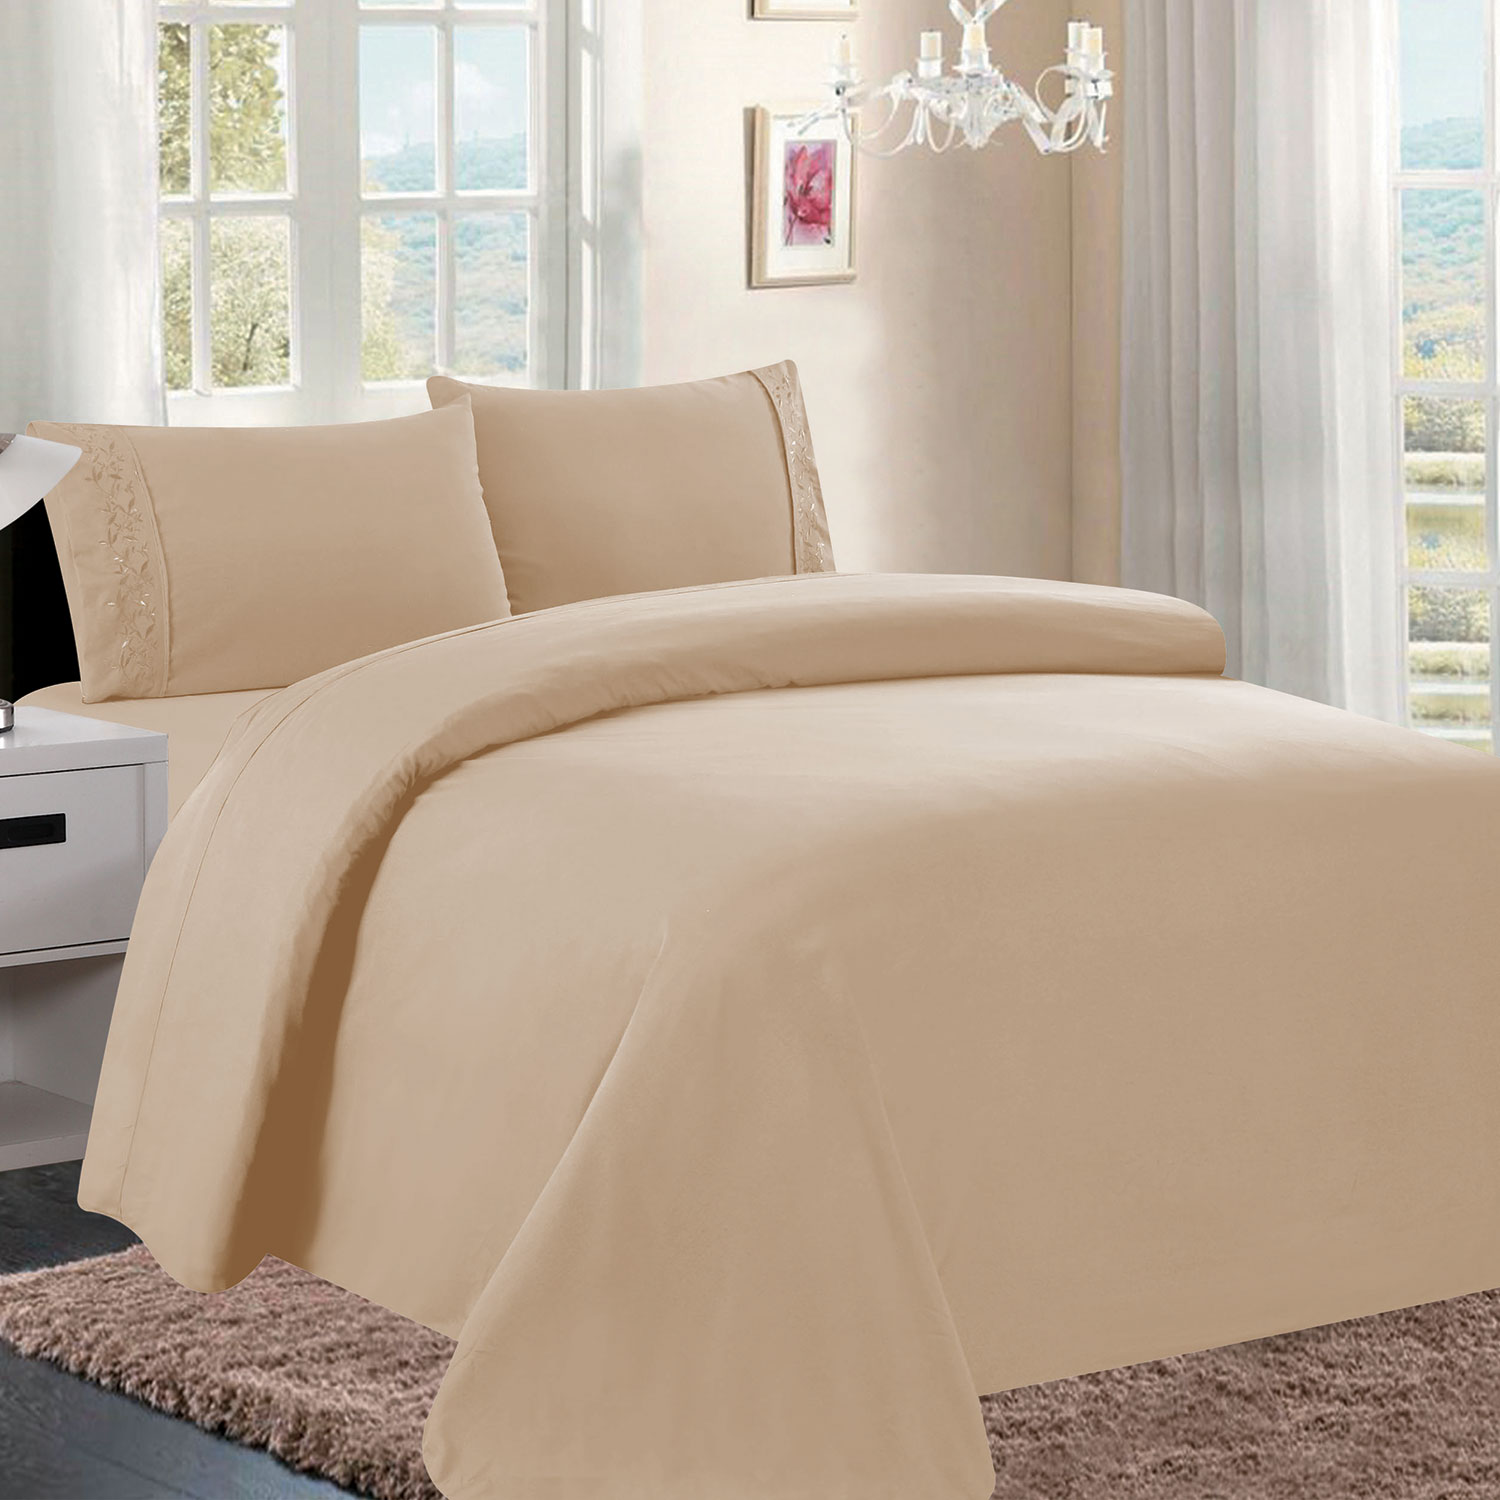 FEUILLE Collection - Solid sheet set with embroidered leaves trim - Double, beige